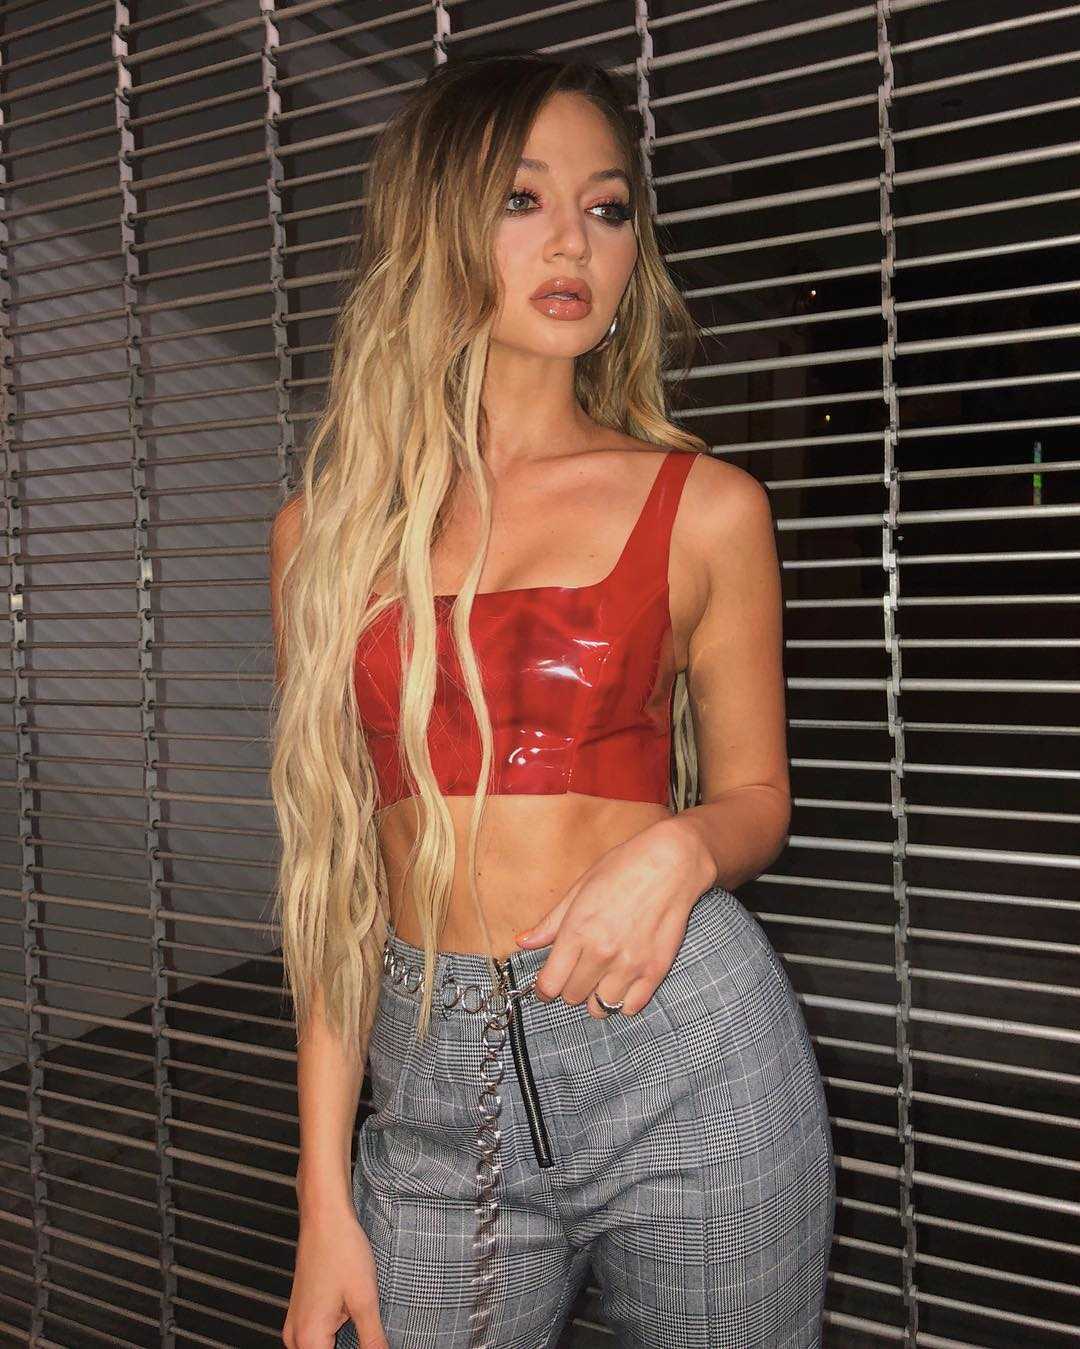 51 Hottest Erika Costell Big Butt Pictures That Will Make You Begin To Look All Starry Eyed At Her 186